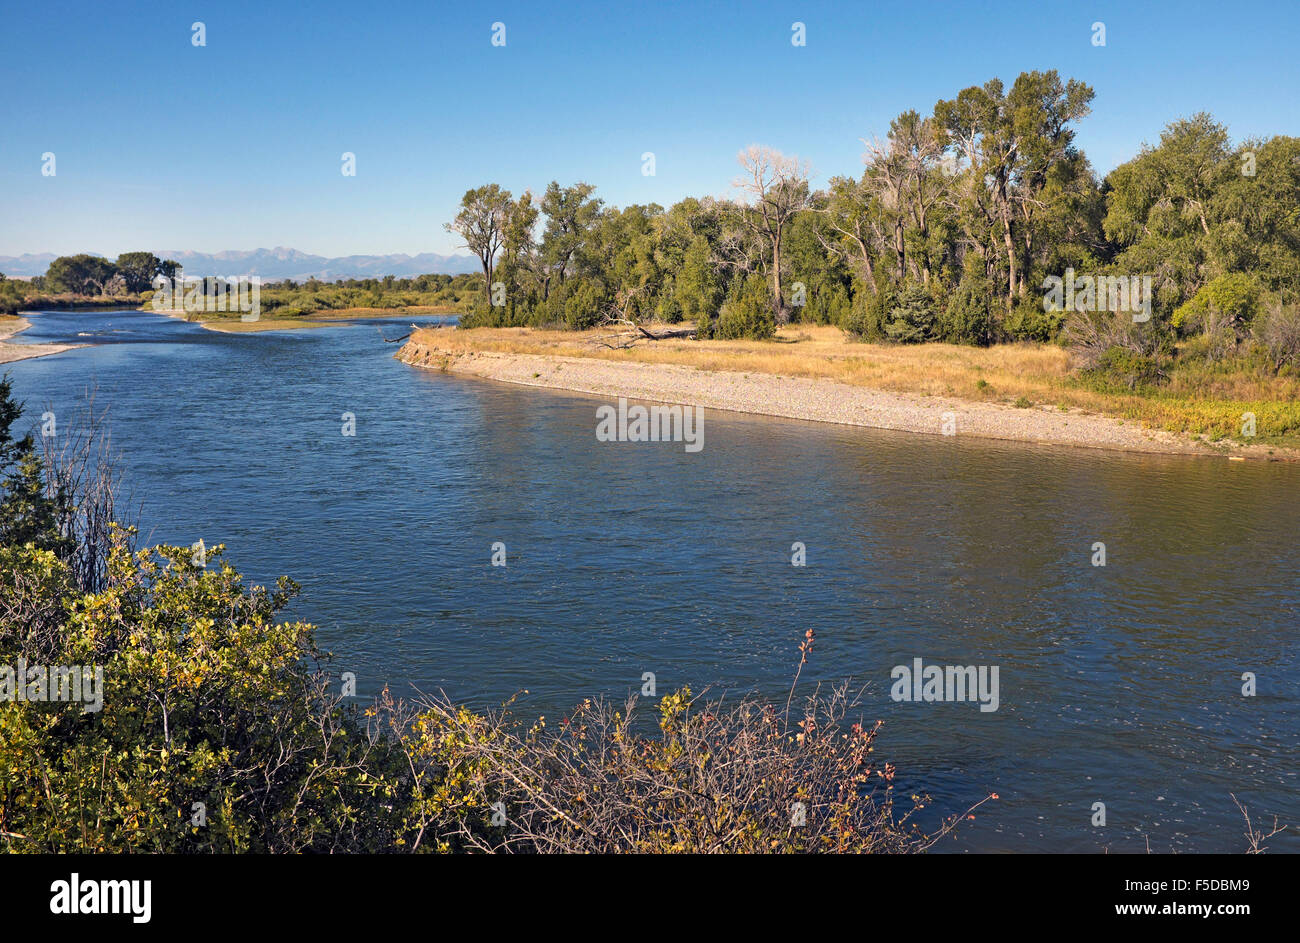 The headwaters of the Missouri River, where the Jefferson, Gallatin, and Madison Rivers come together, near Three Forks, Montana Stock Photo